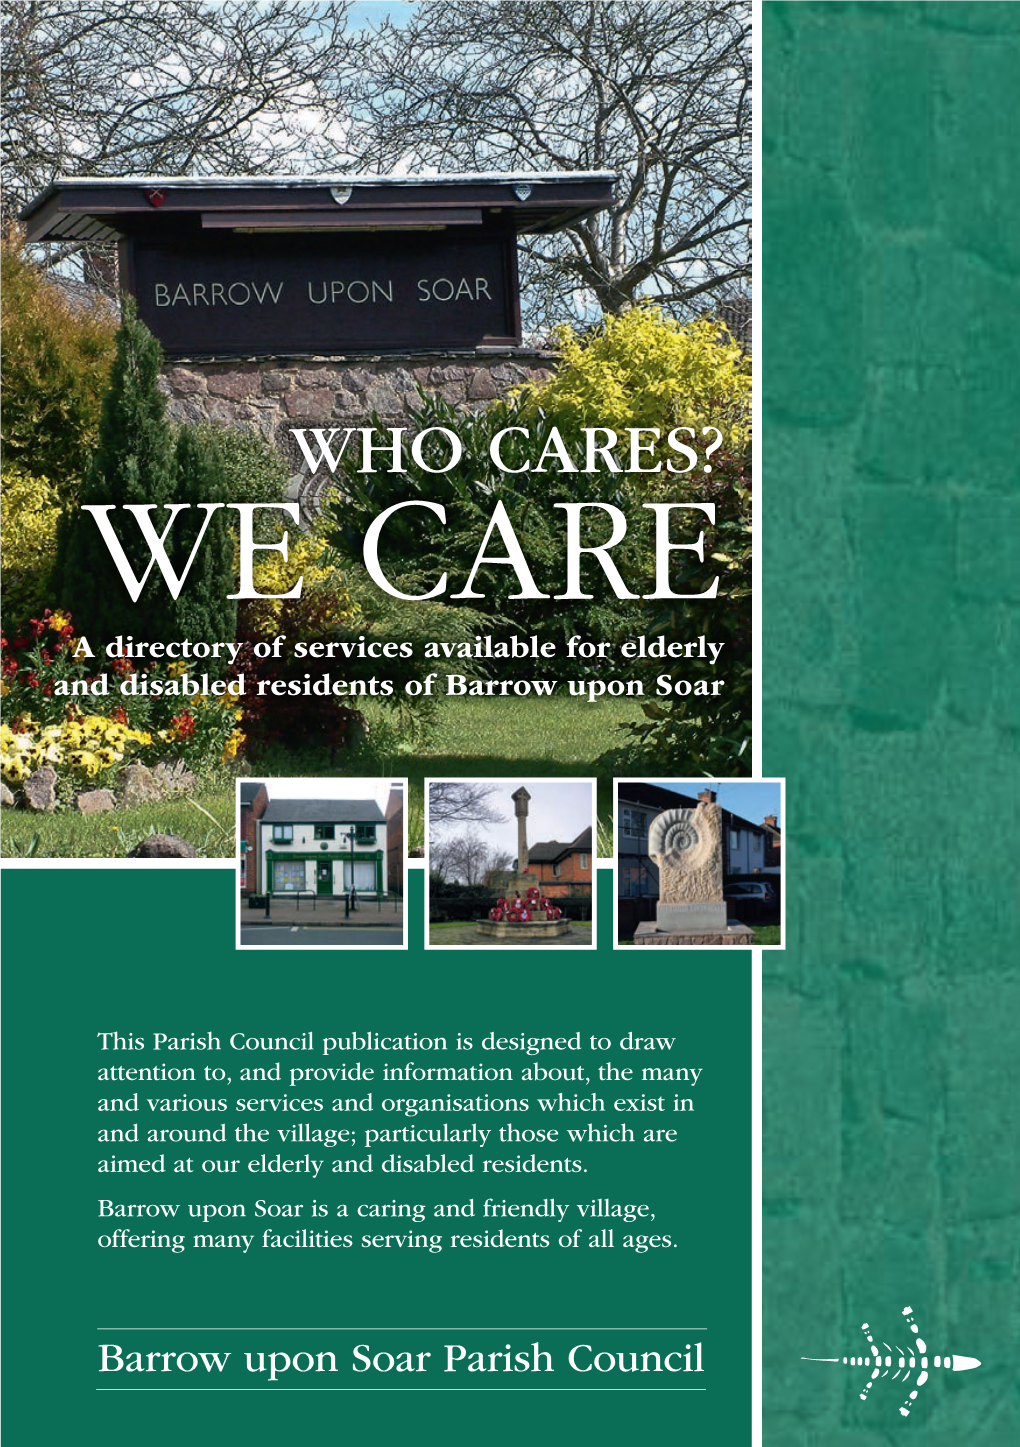 WE CARE a Directory of Services Available for Elderly and Disabled Residents of Barrow Upon Soar